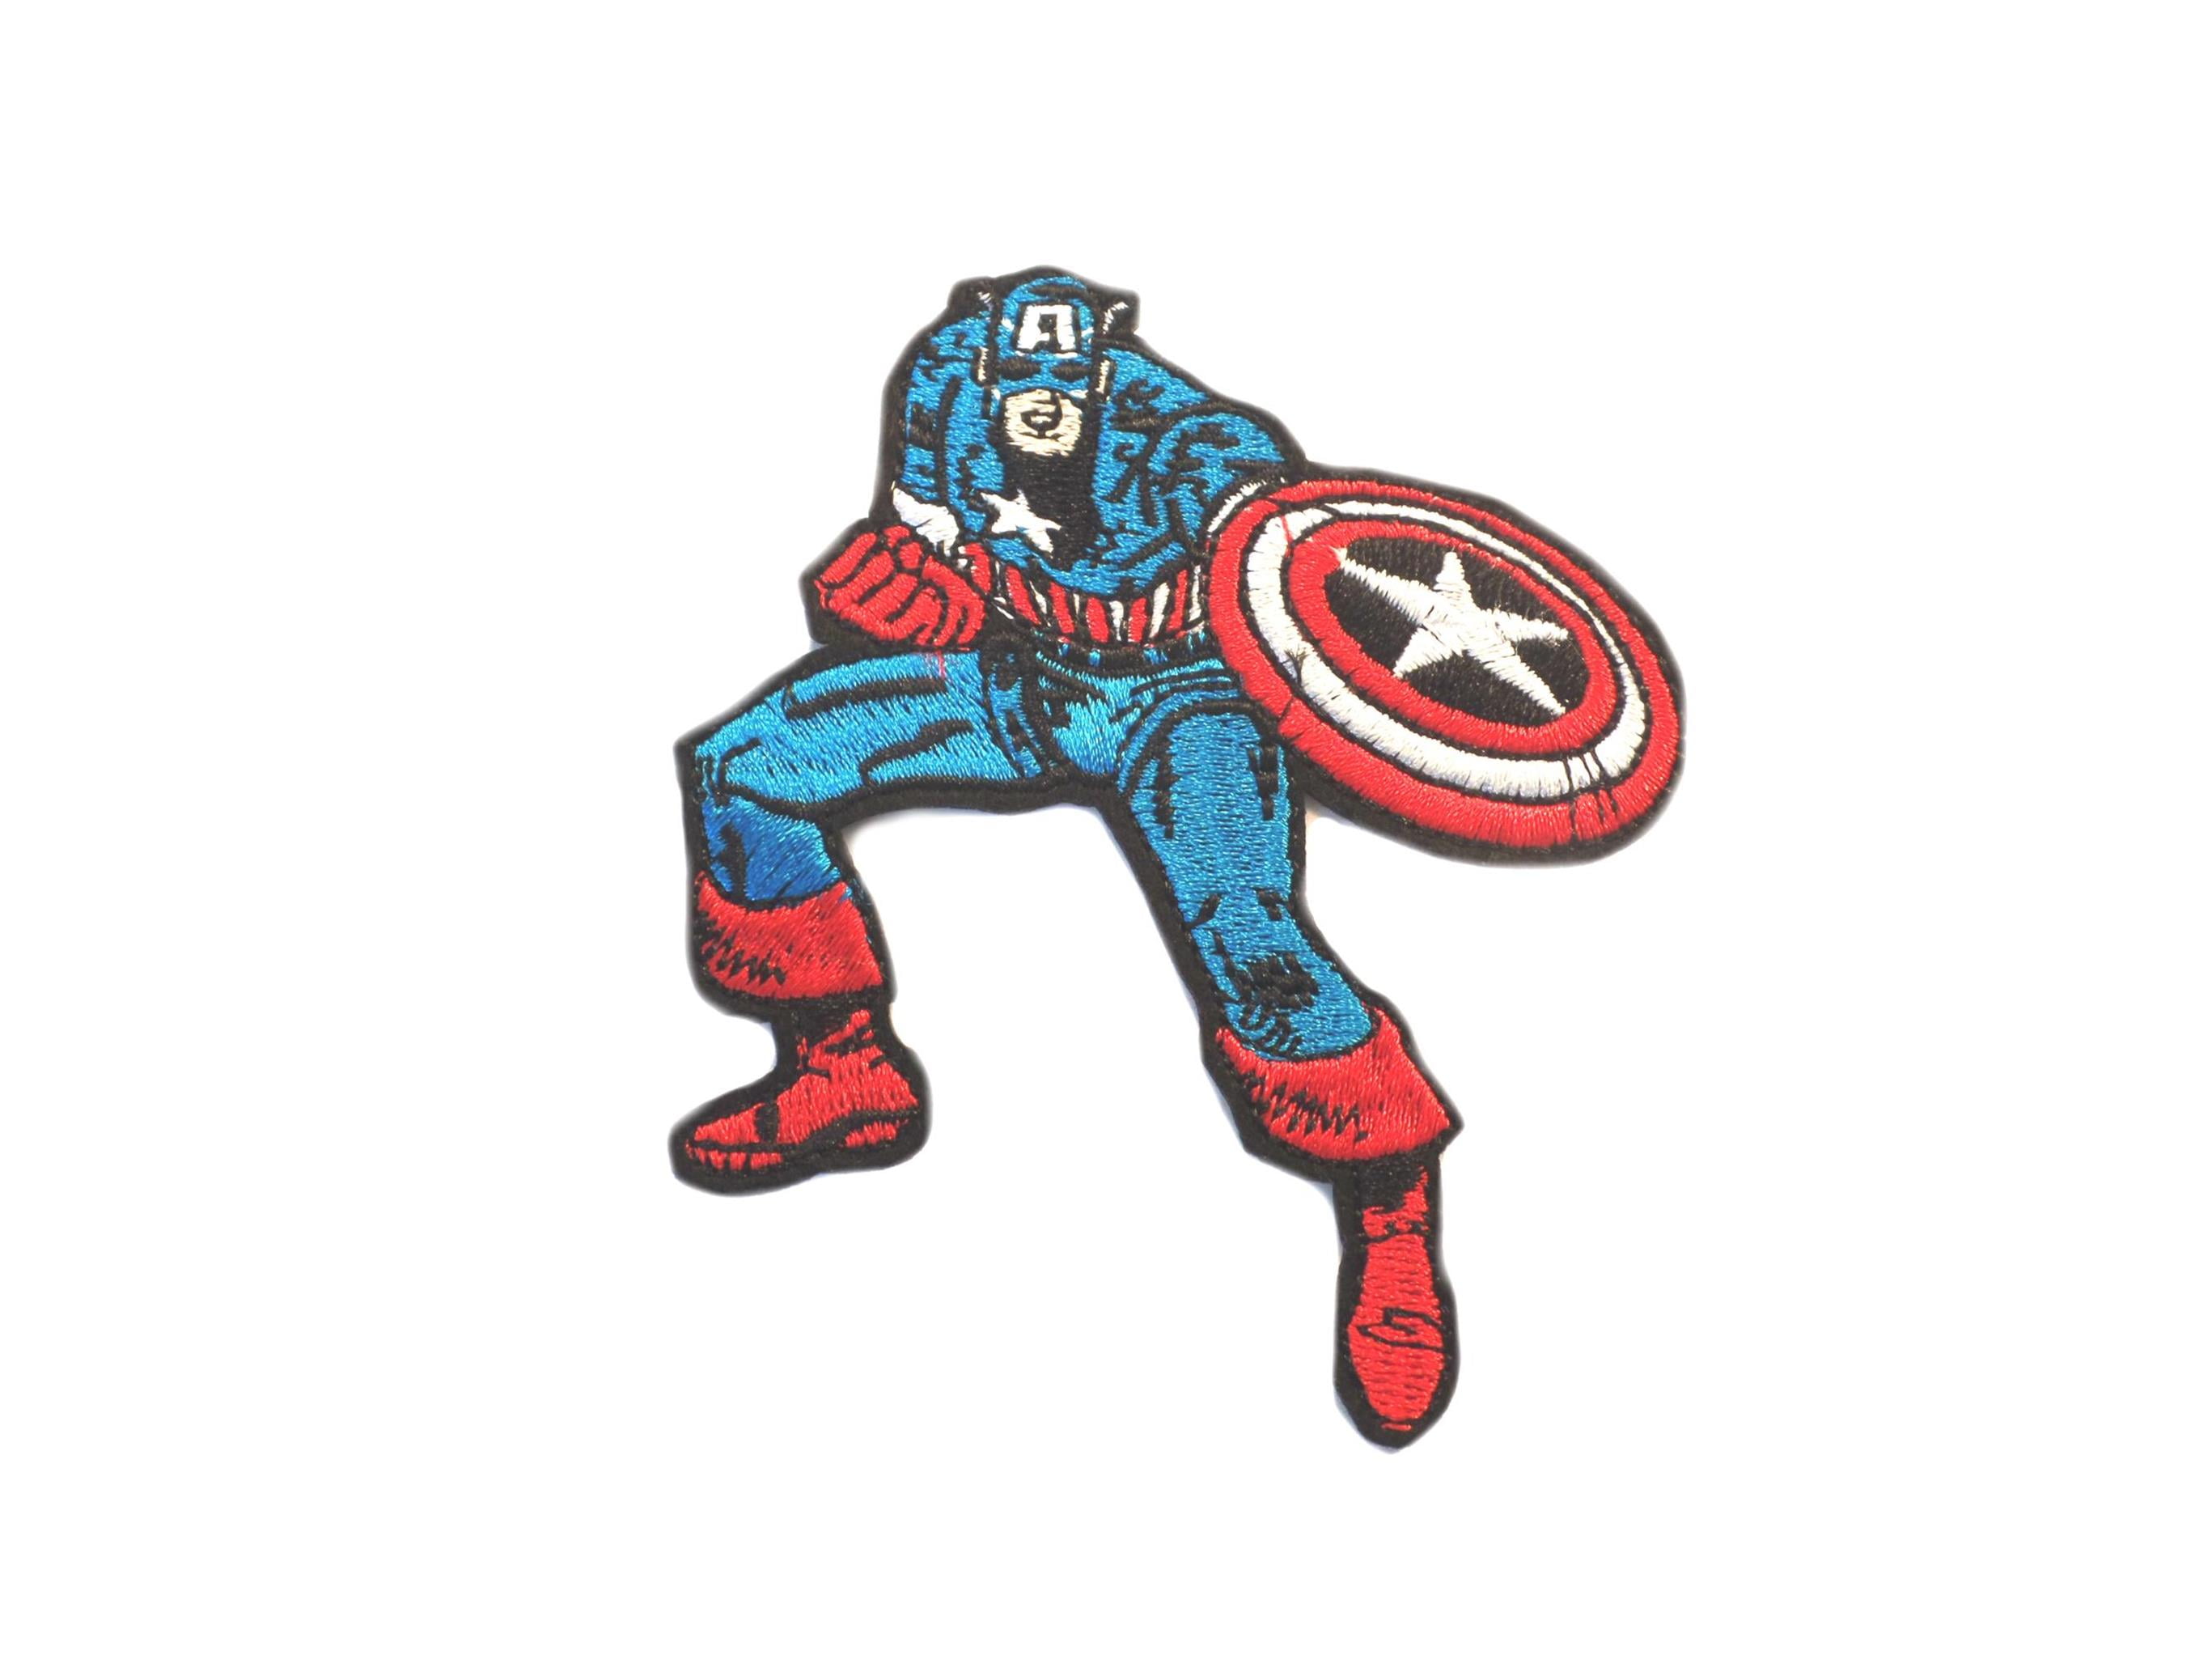 20pcs/set Marvel Superhero Iron On Patches For Clothes Decorative  Embroidered Sew On Cartoon Anime Spiderman Diy Patches Applique